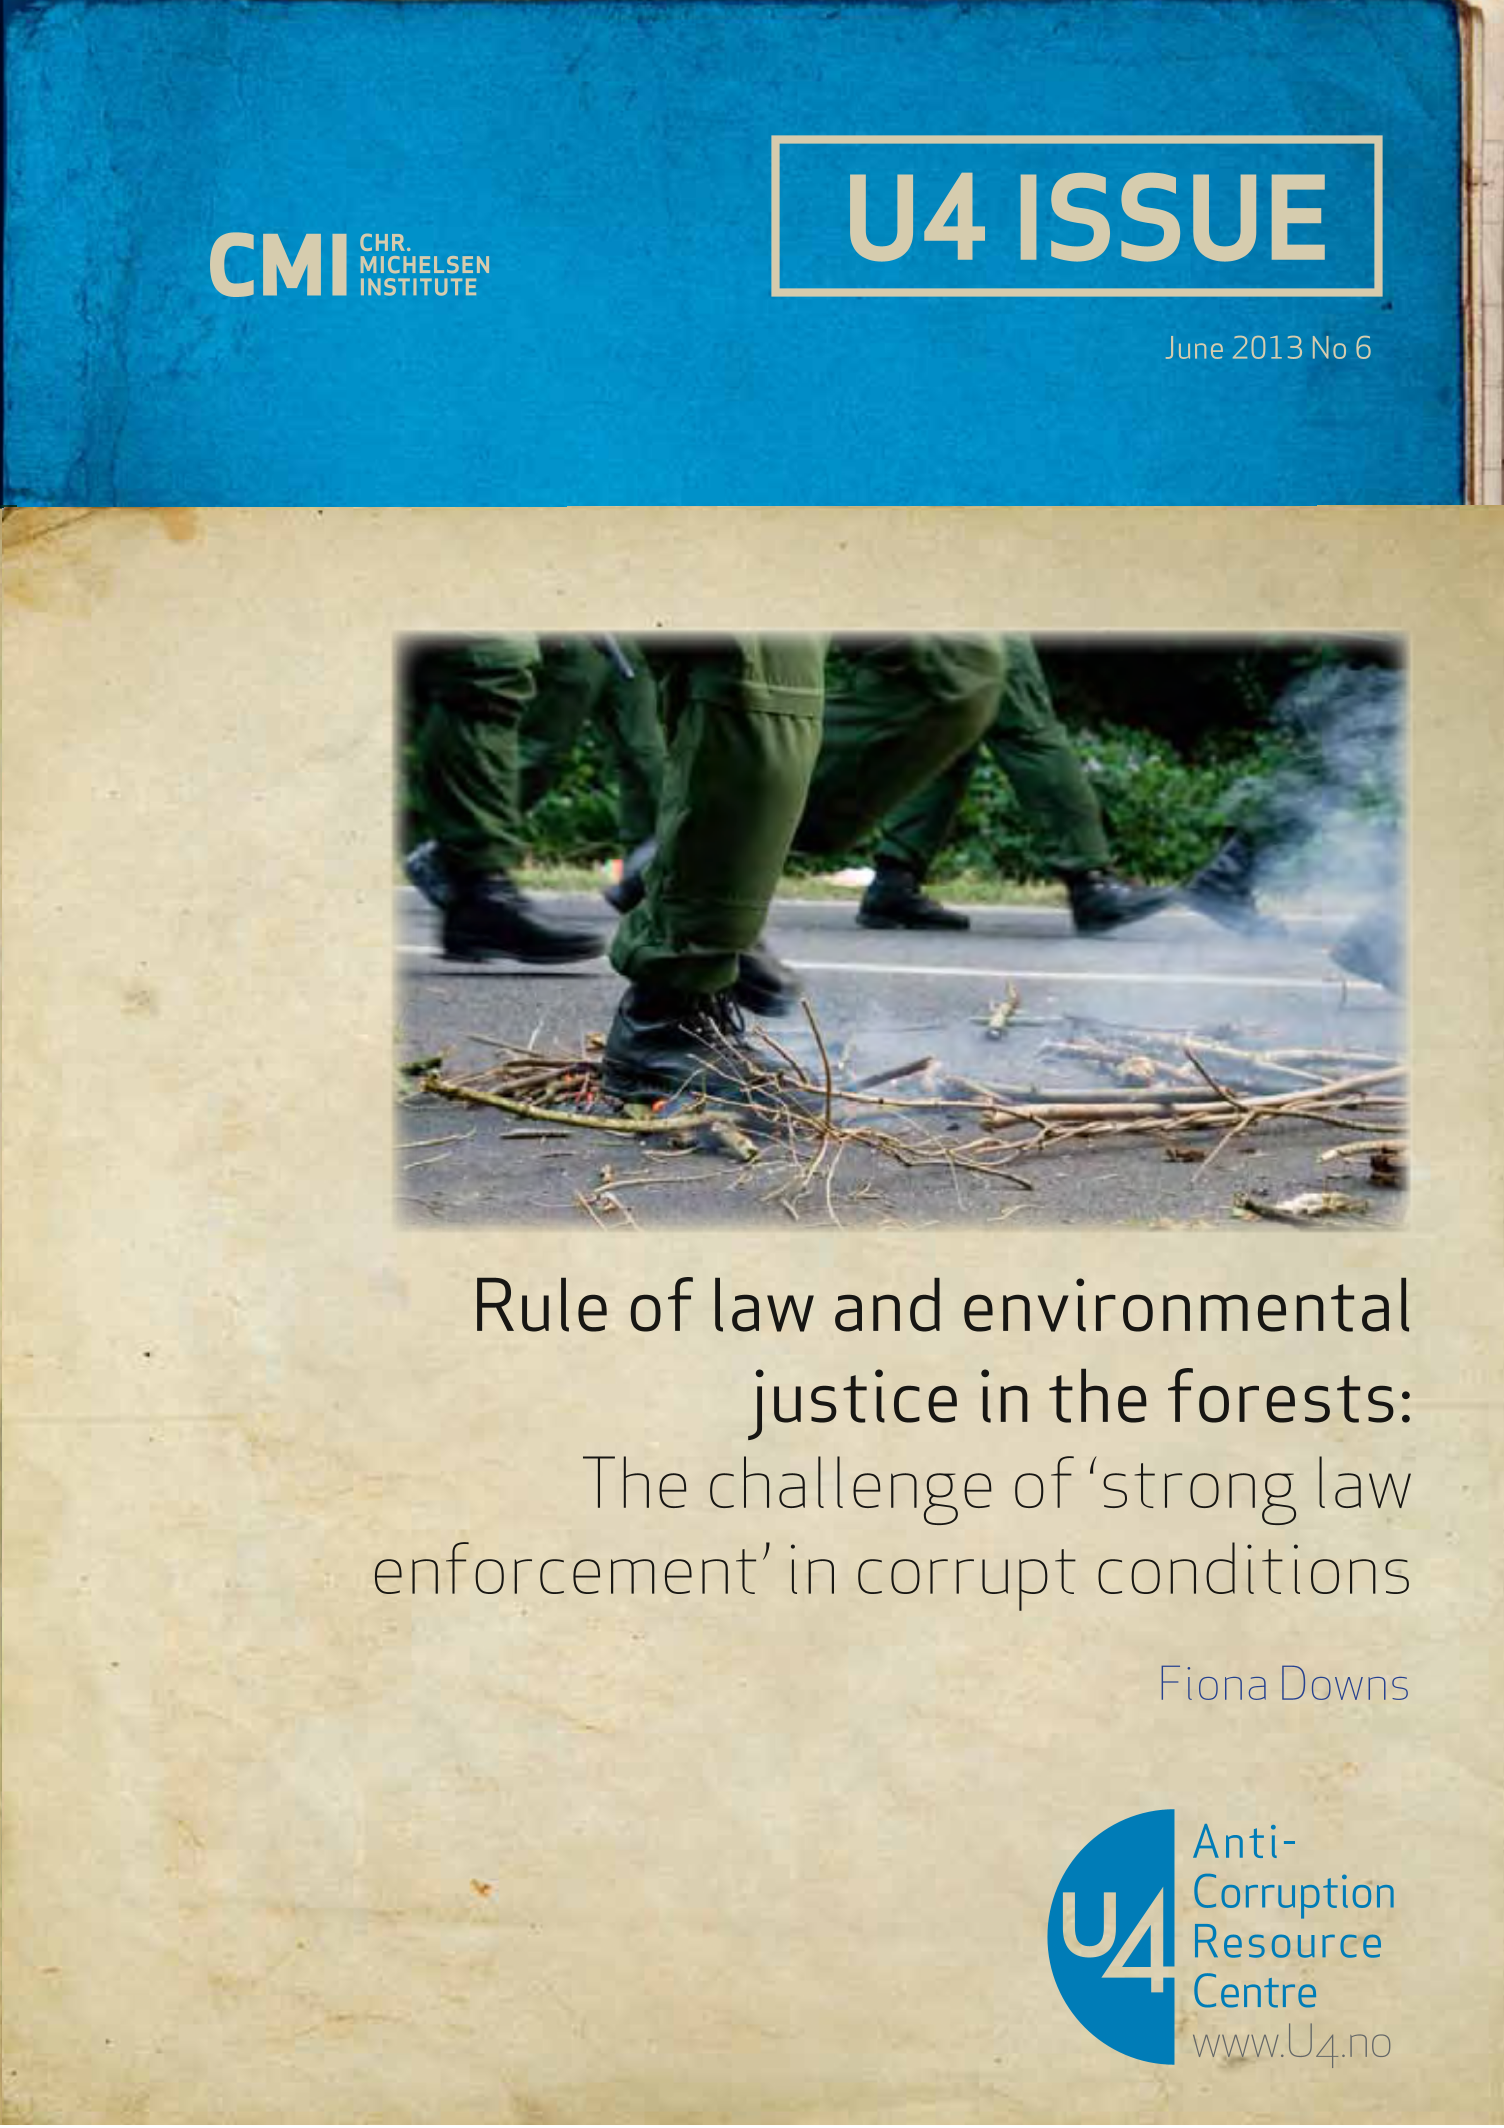 Rule of law and environmental justice in the forests: The challenge of 'strong law enforcement' in corrupt conditions